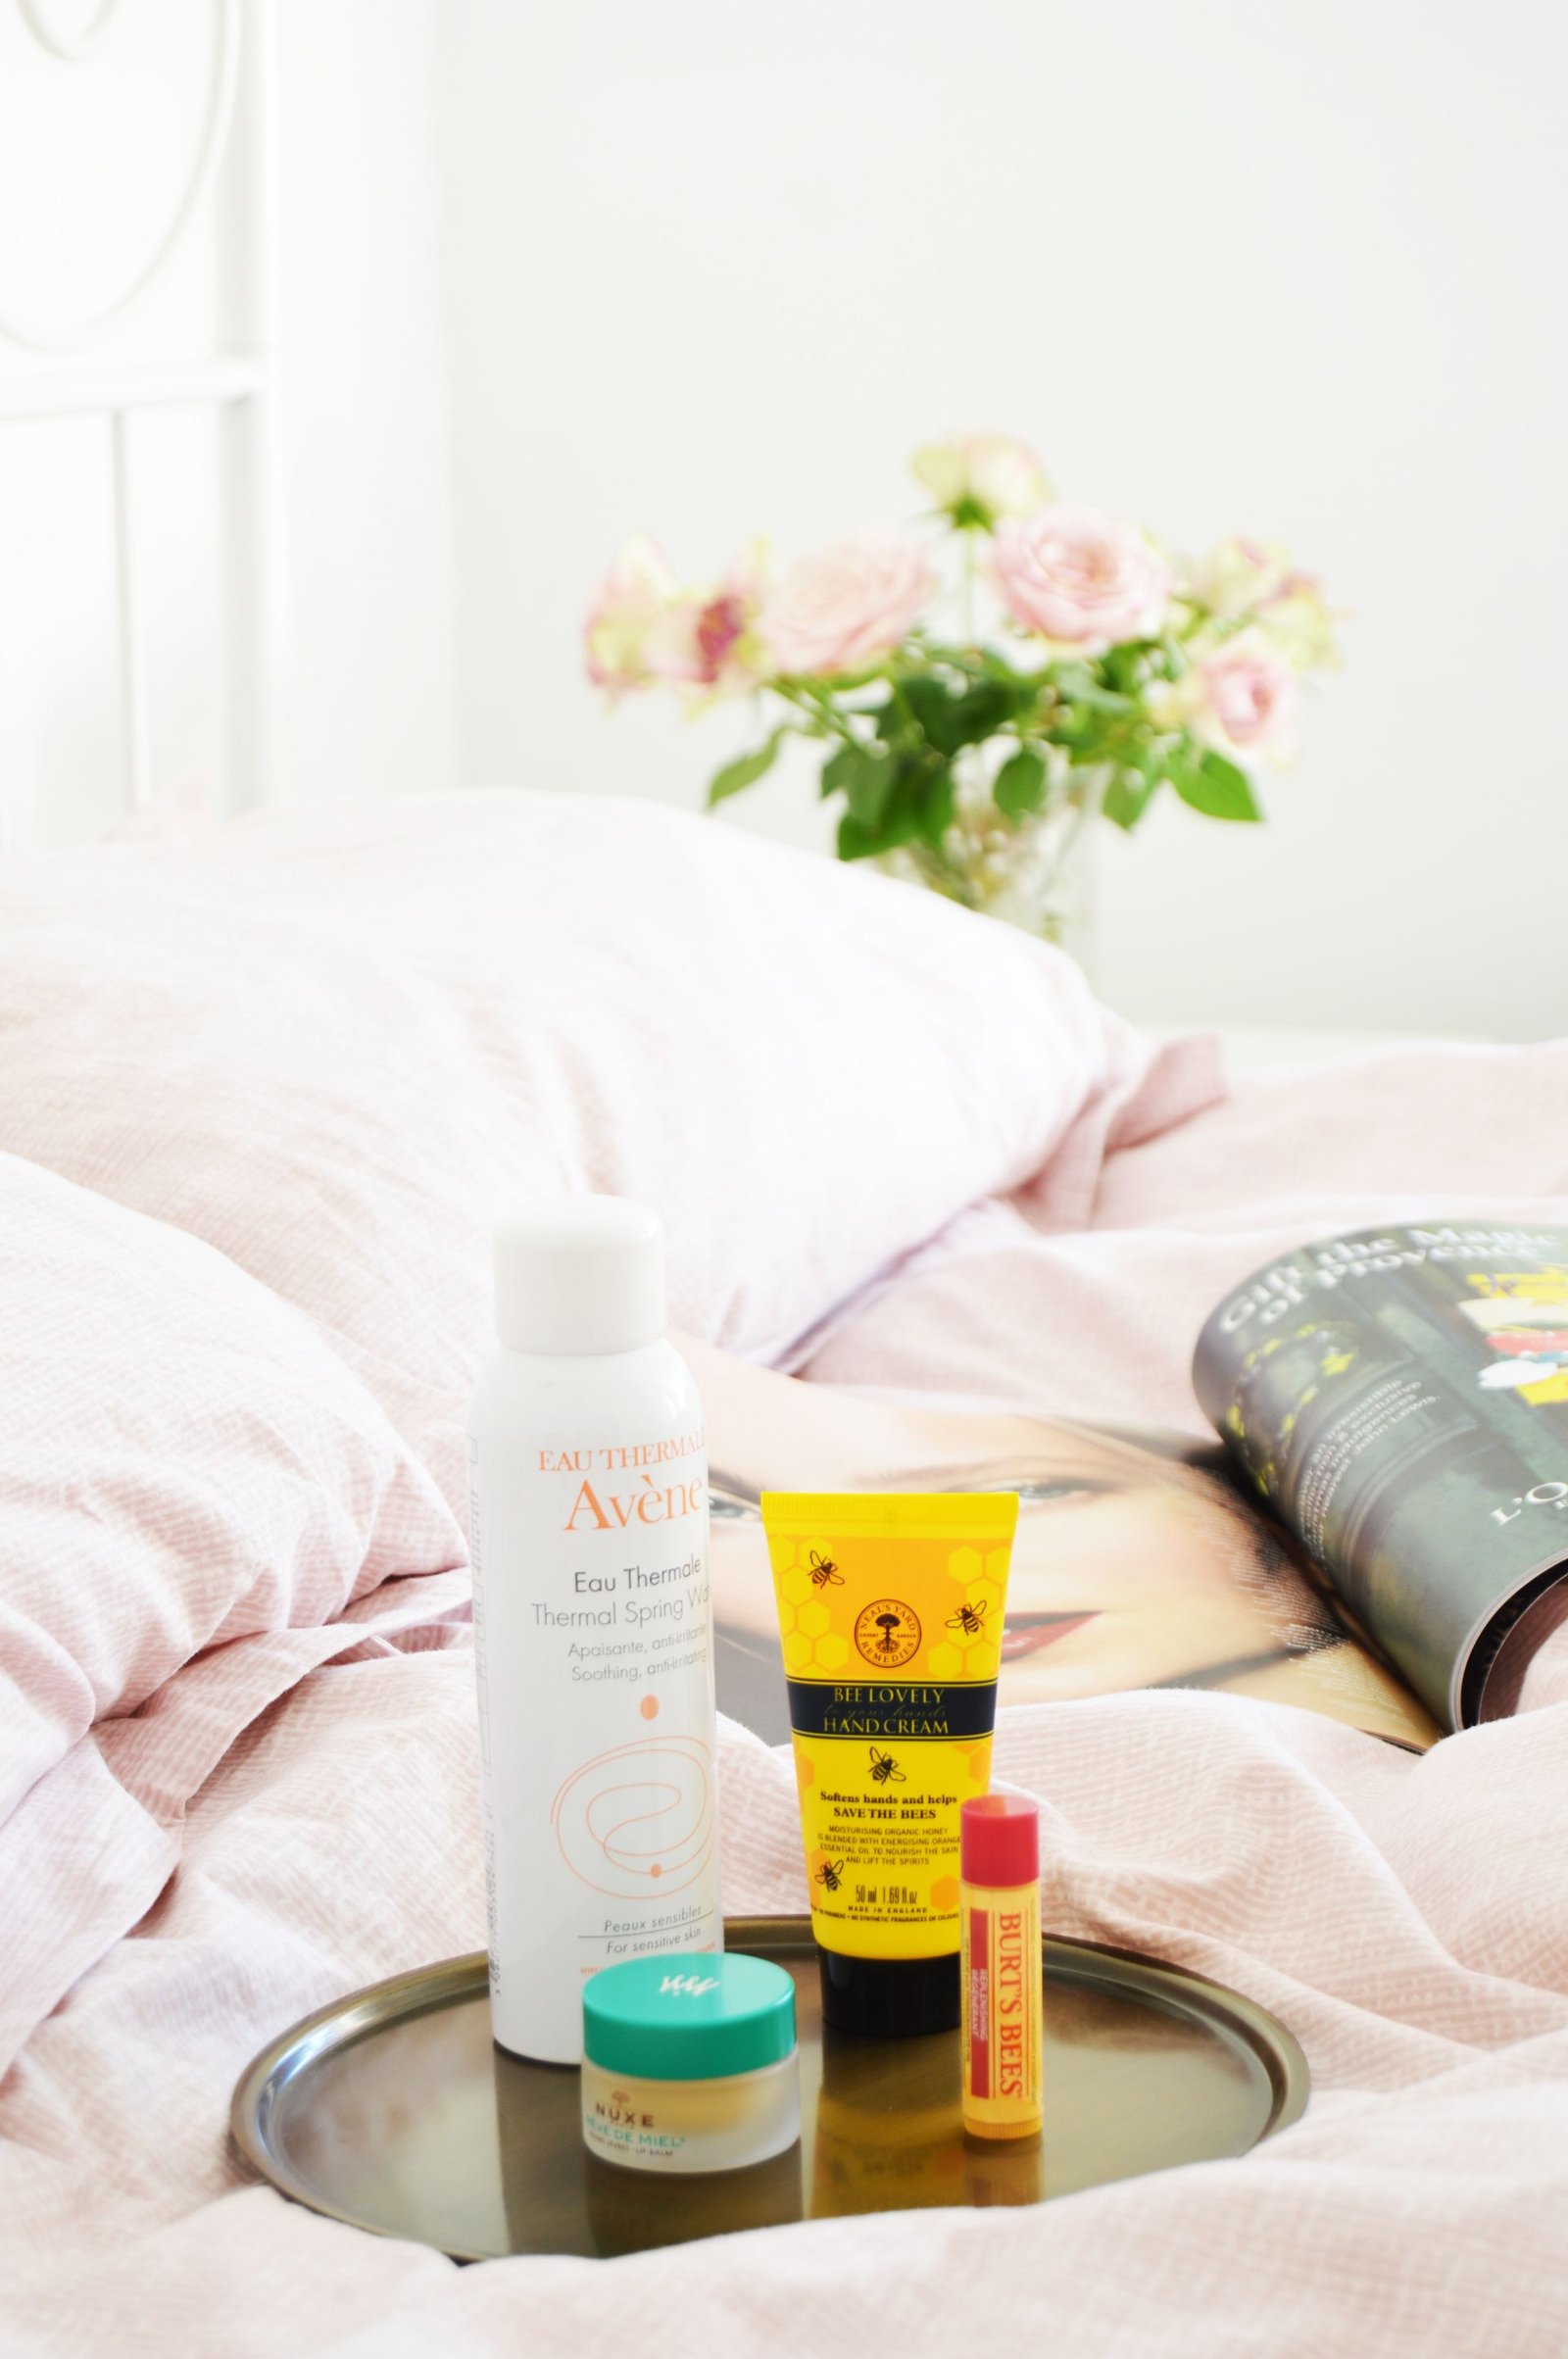 There are some essentials that you should have on your bedside table. Hand cream, lip balm and facial mist are some of these bedside beauty essentials.